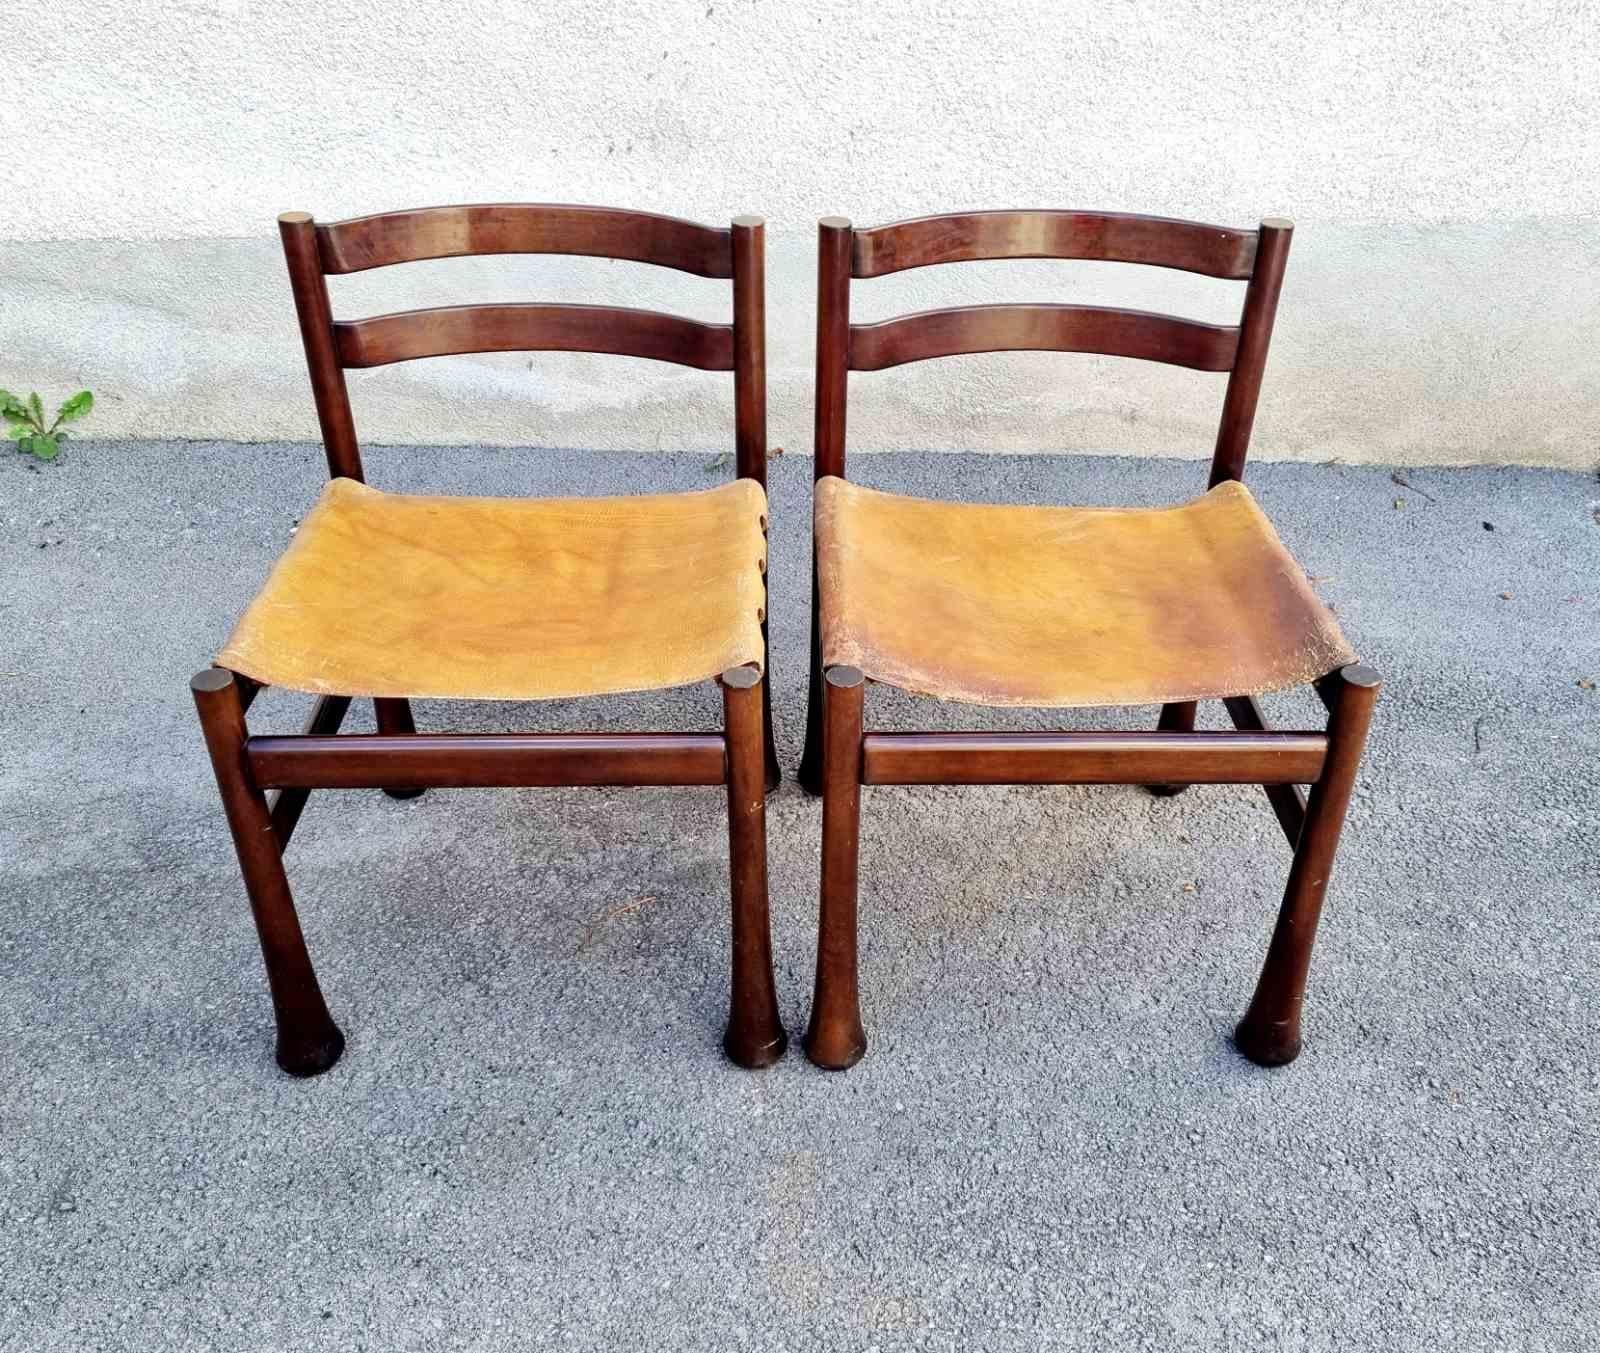 Italian Modern Rosewood and Leather Dining Chairs, Design Luciano Frigerio, 70s For Sale 1